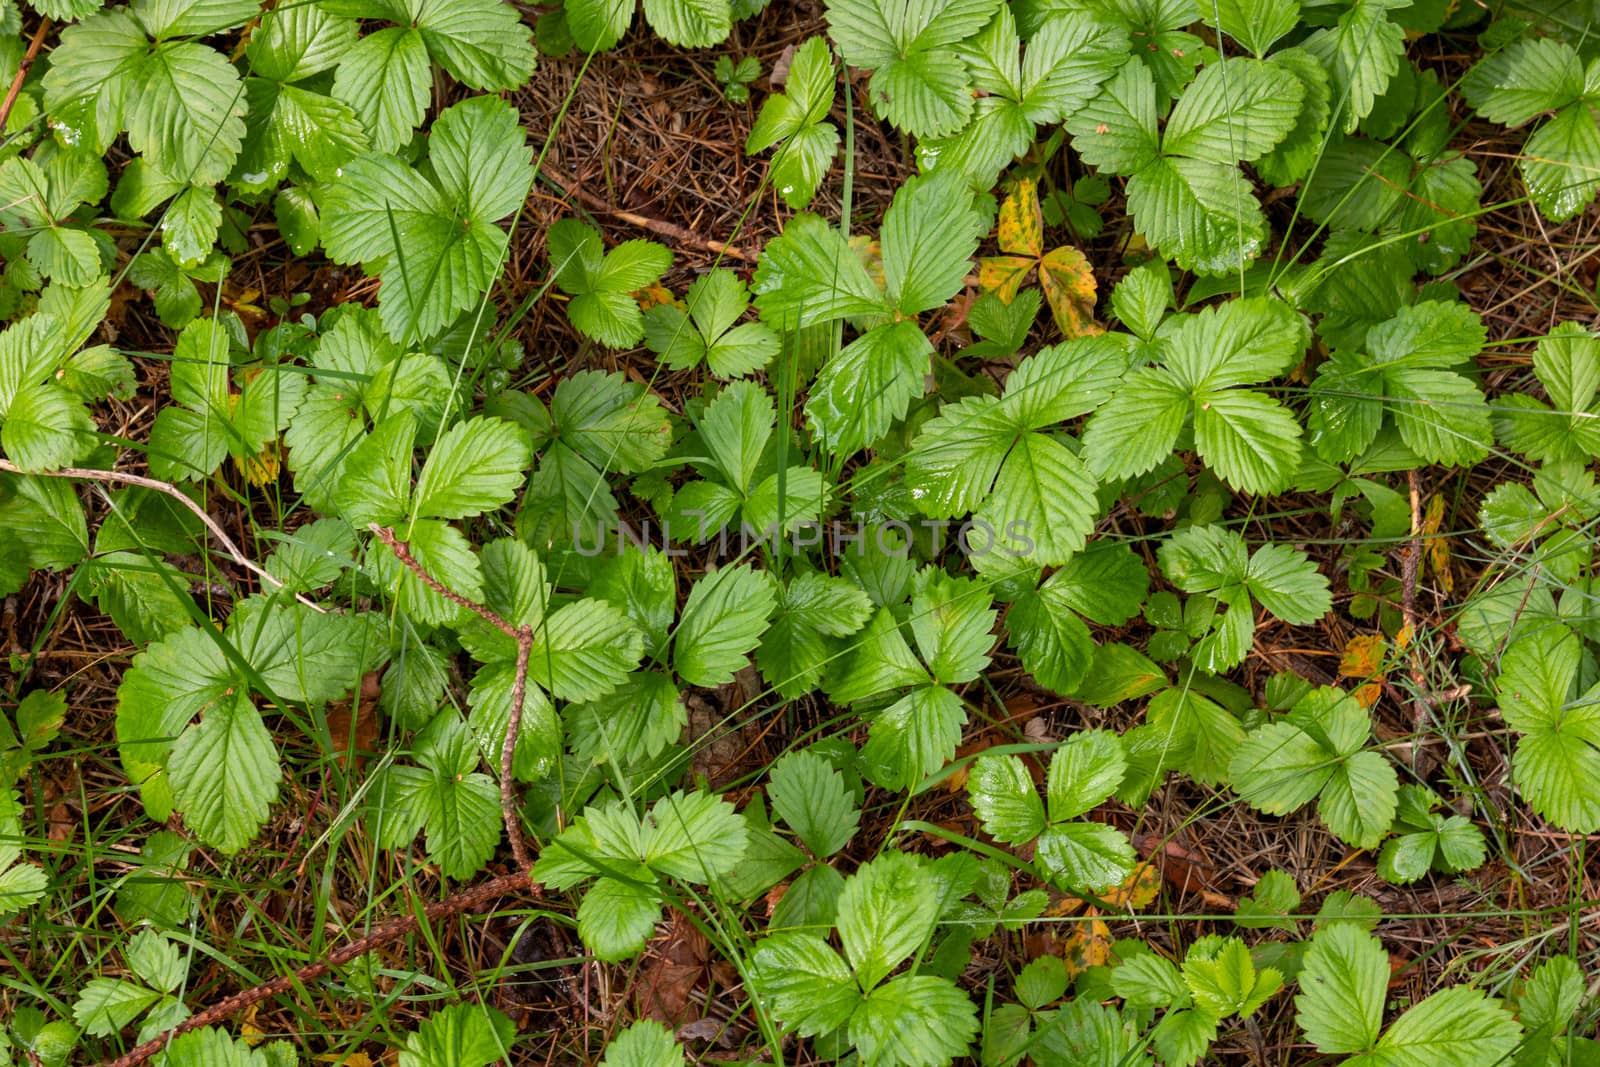 Glade covered with leaves of the woodland strawberry among grass at selective focus by lapushka62